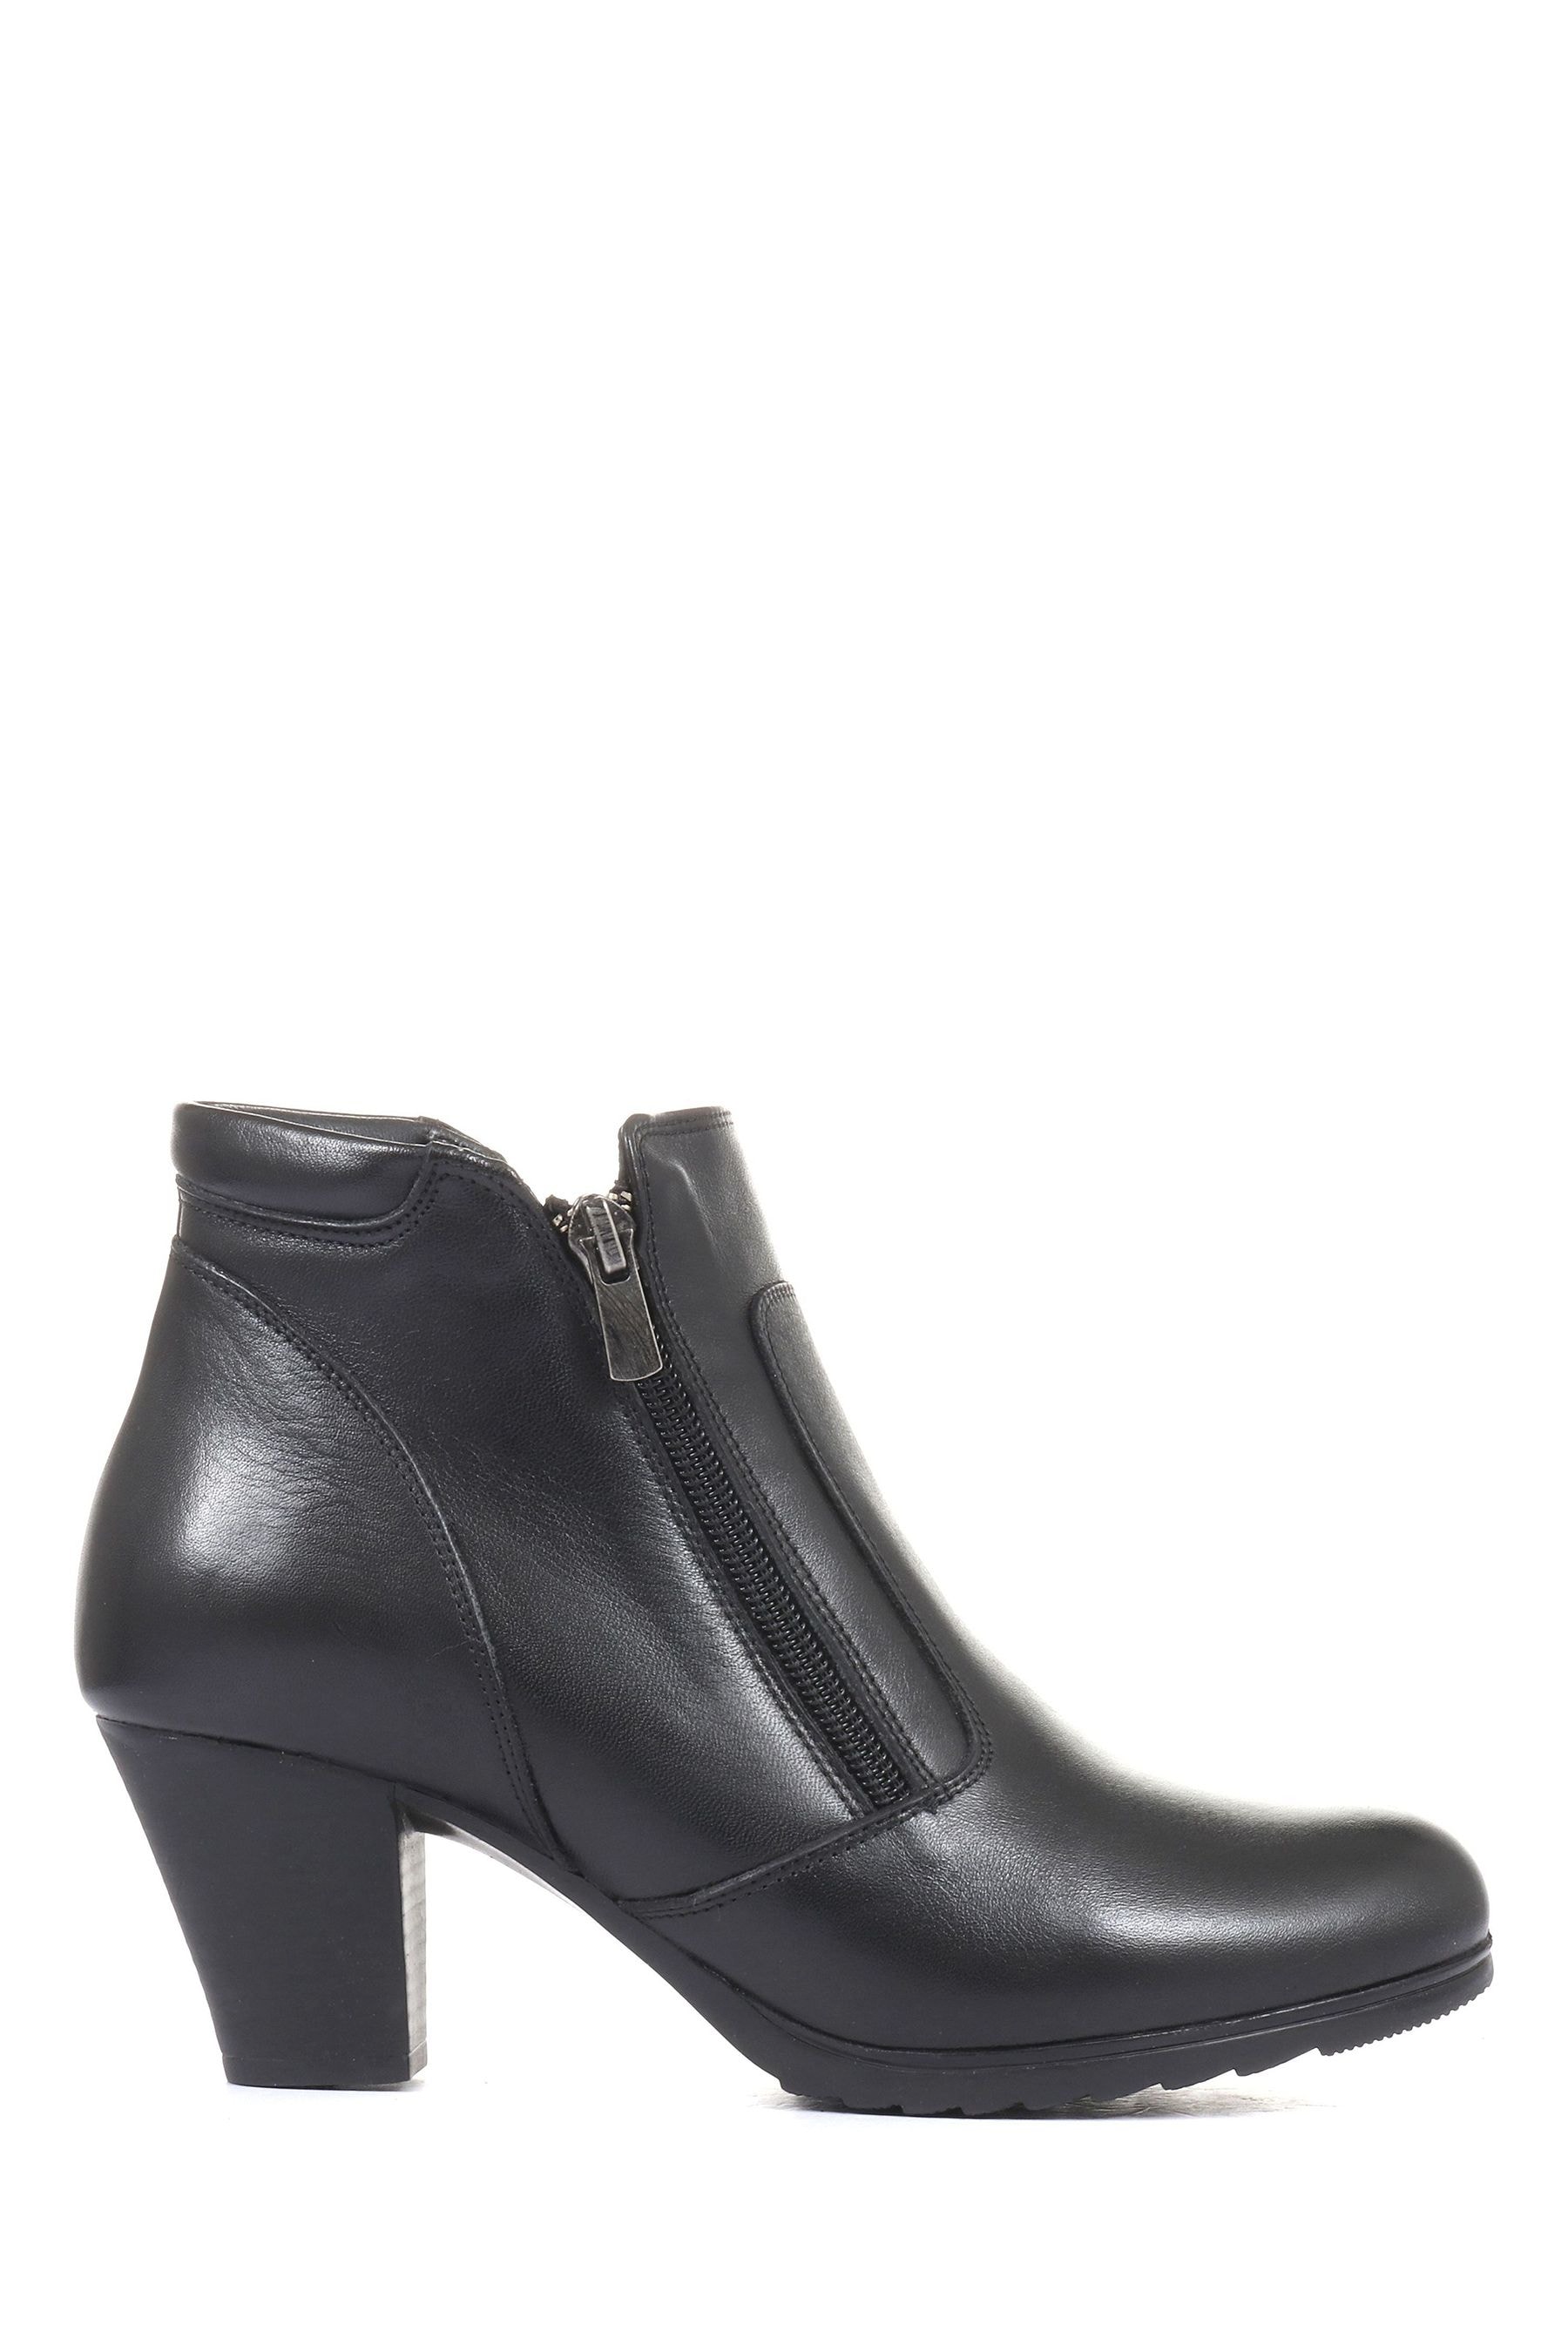 Buy Pavers Ladies Leather Heeled Ankle Boots from the Next UK online shop